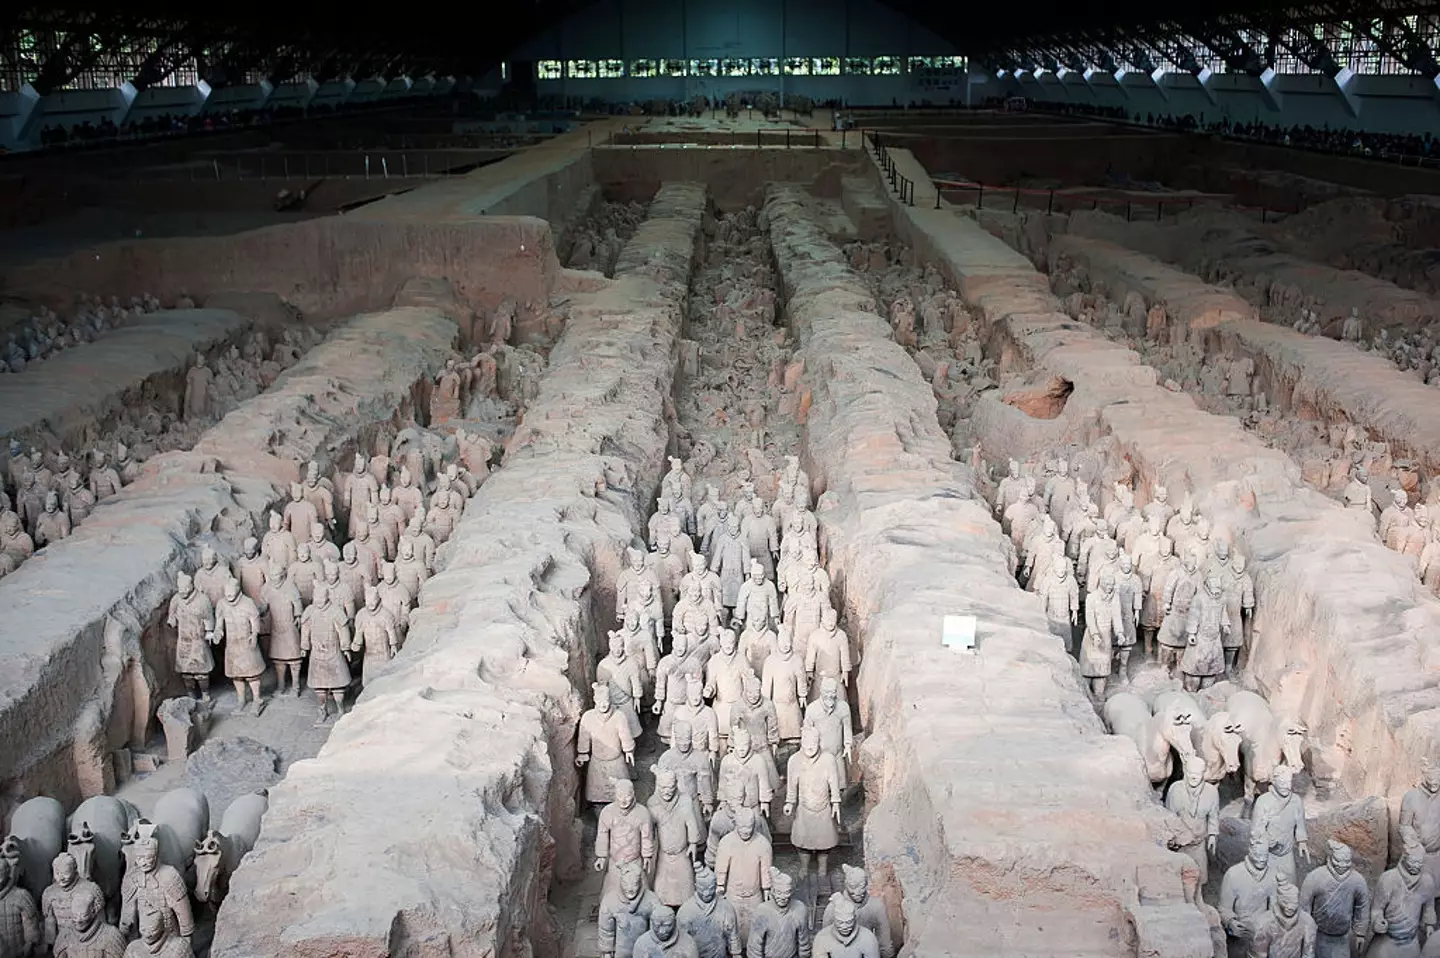 Qin Shi Huang's tomb is flanked by thousands of Terracotta soldiers.